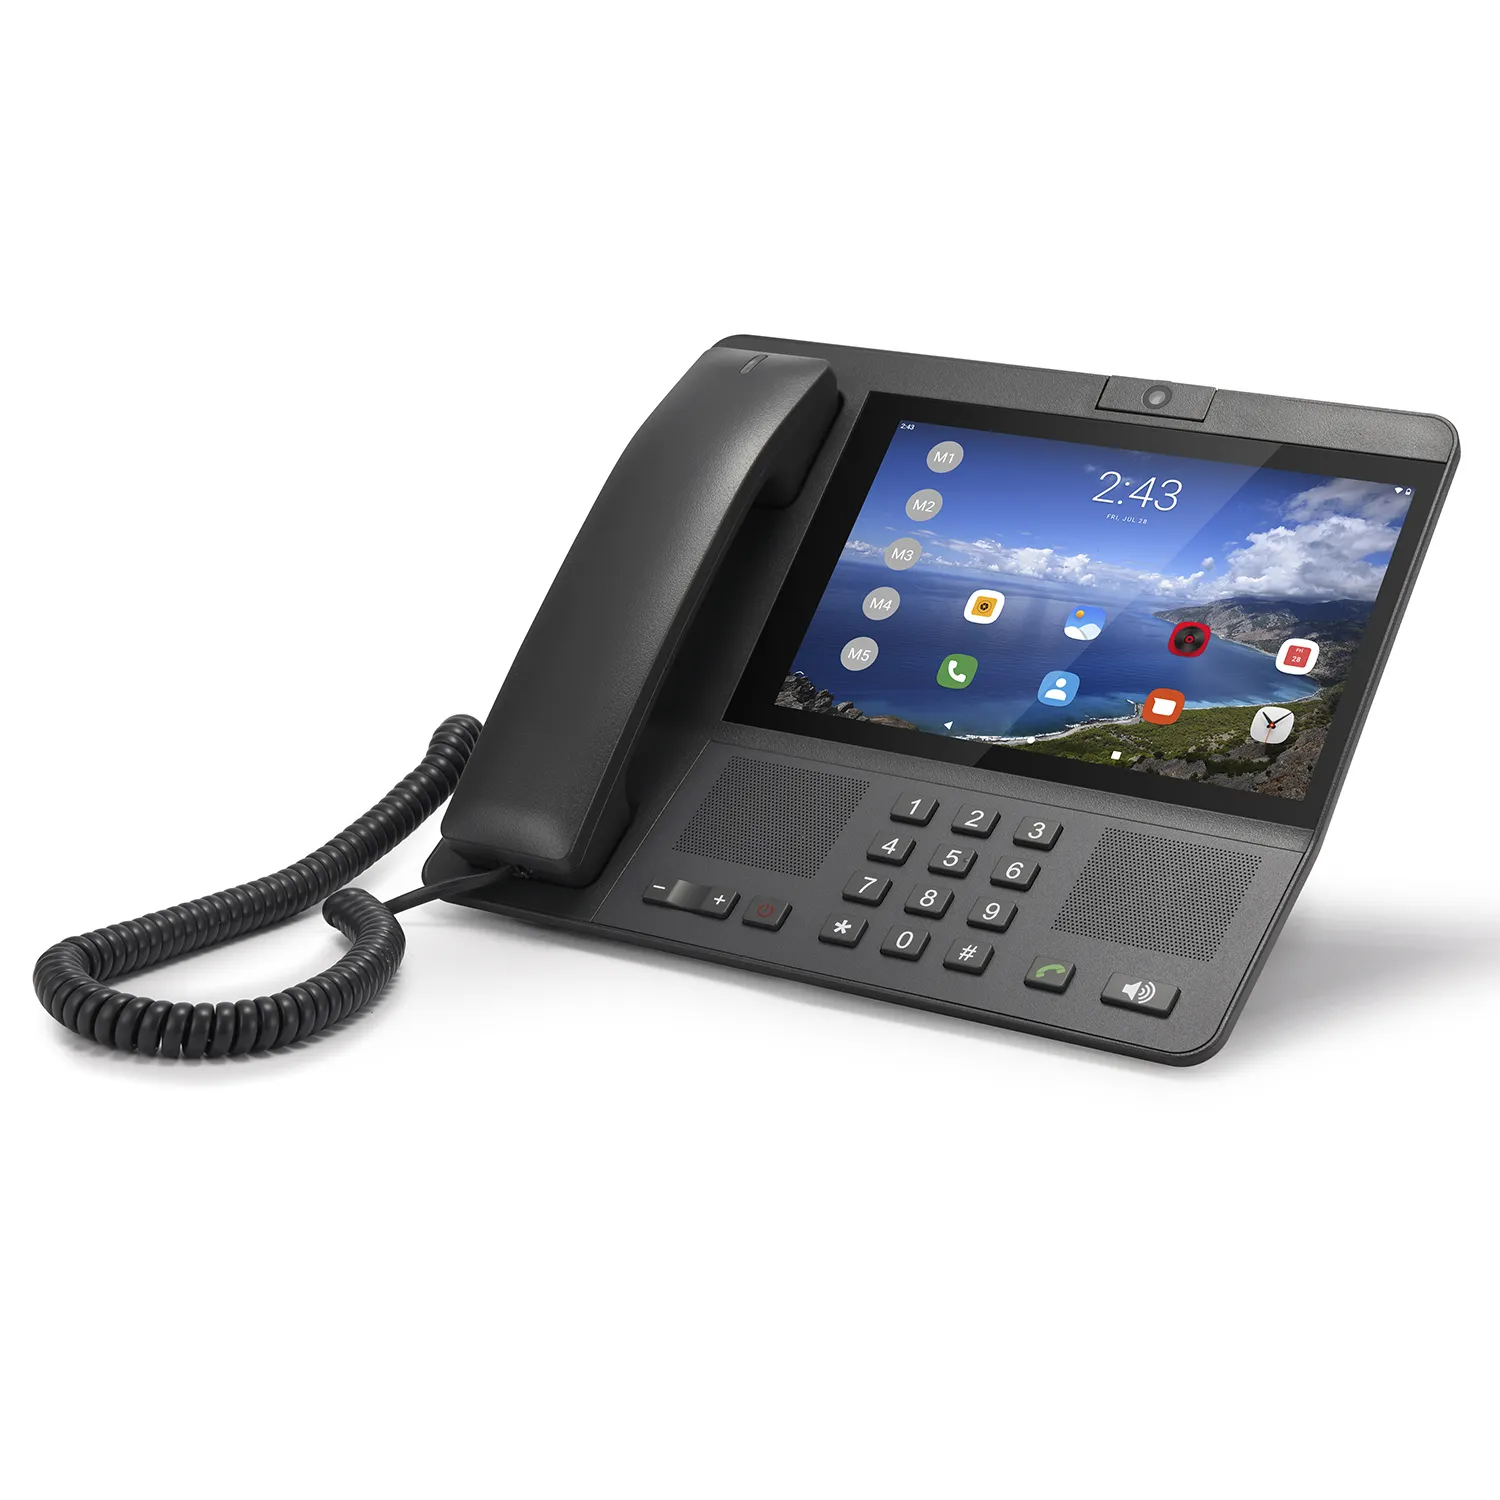 LS830 4G LTE VOLTE Sim Card 8 Inch Screen MP3 FM Video Call Wifi Hotspot Android Cordless Telephone 3G 2G Fixed Wireless Phone